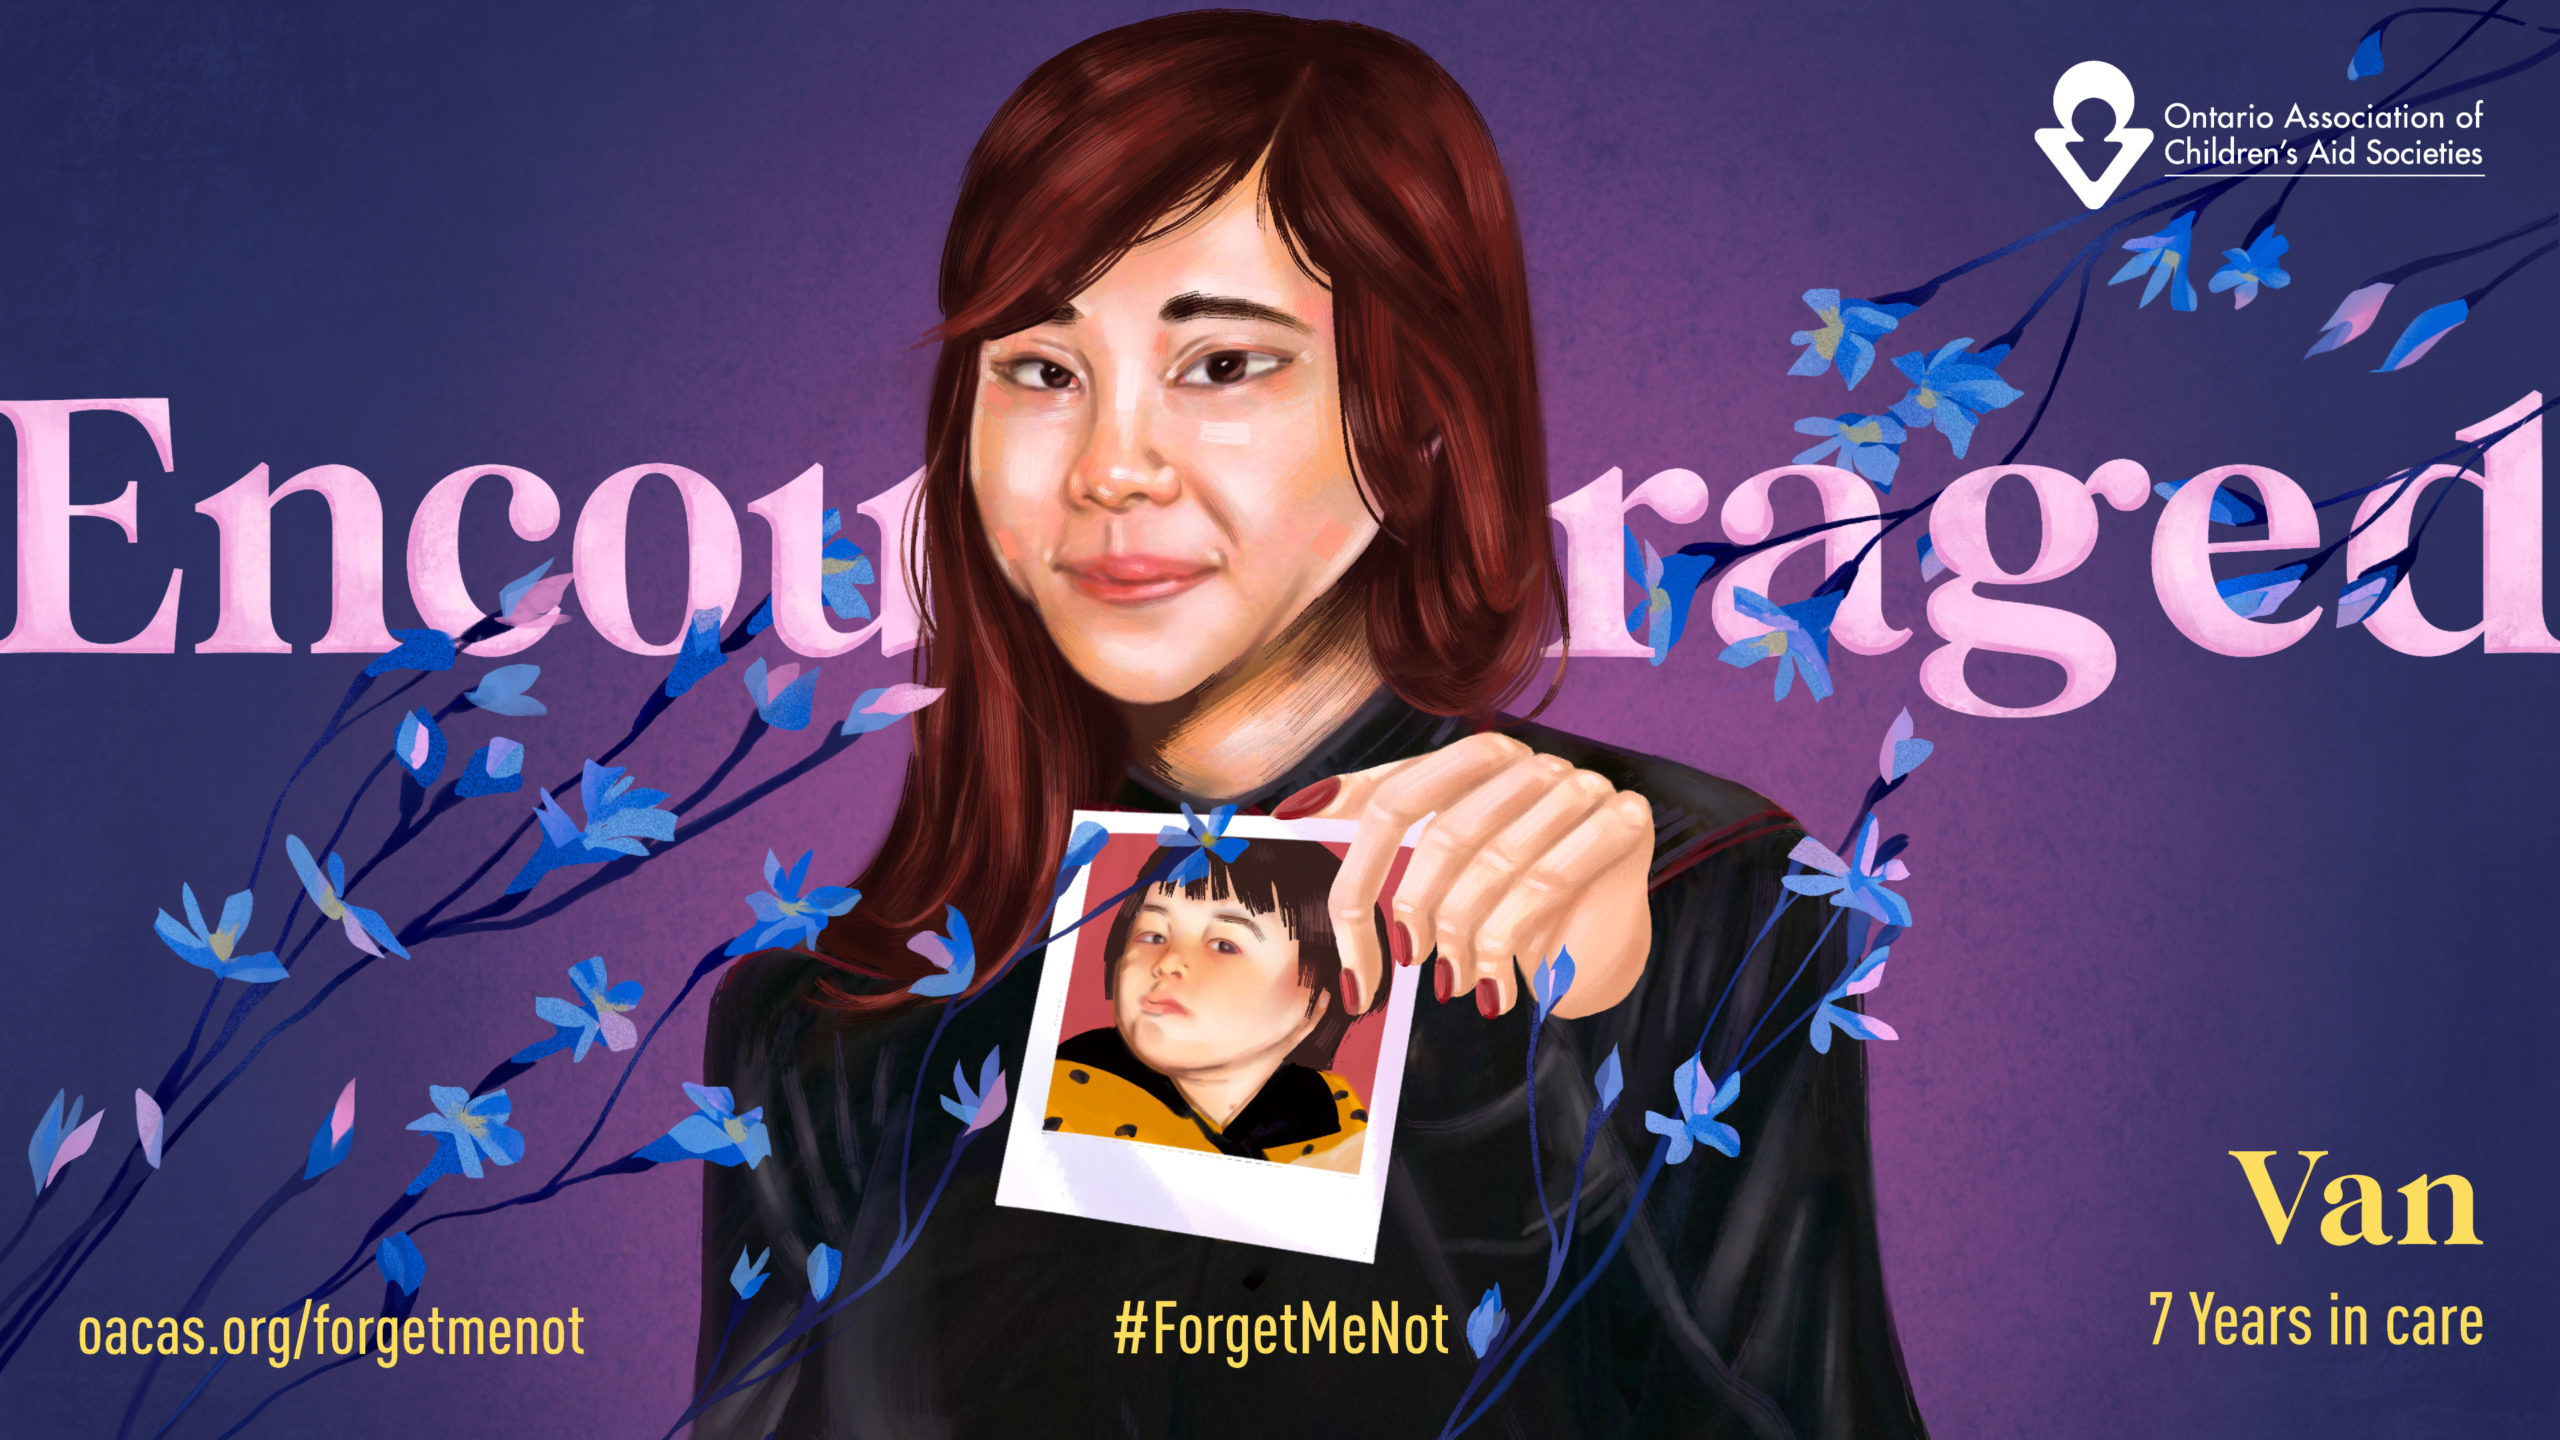 ILLUSTRATION OF WOMAN HOLDING POLAROID OF A CHILDHOOD PHOTO OF HERSELF WITH THE WORD ENCOURAGED BEHIND HER